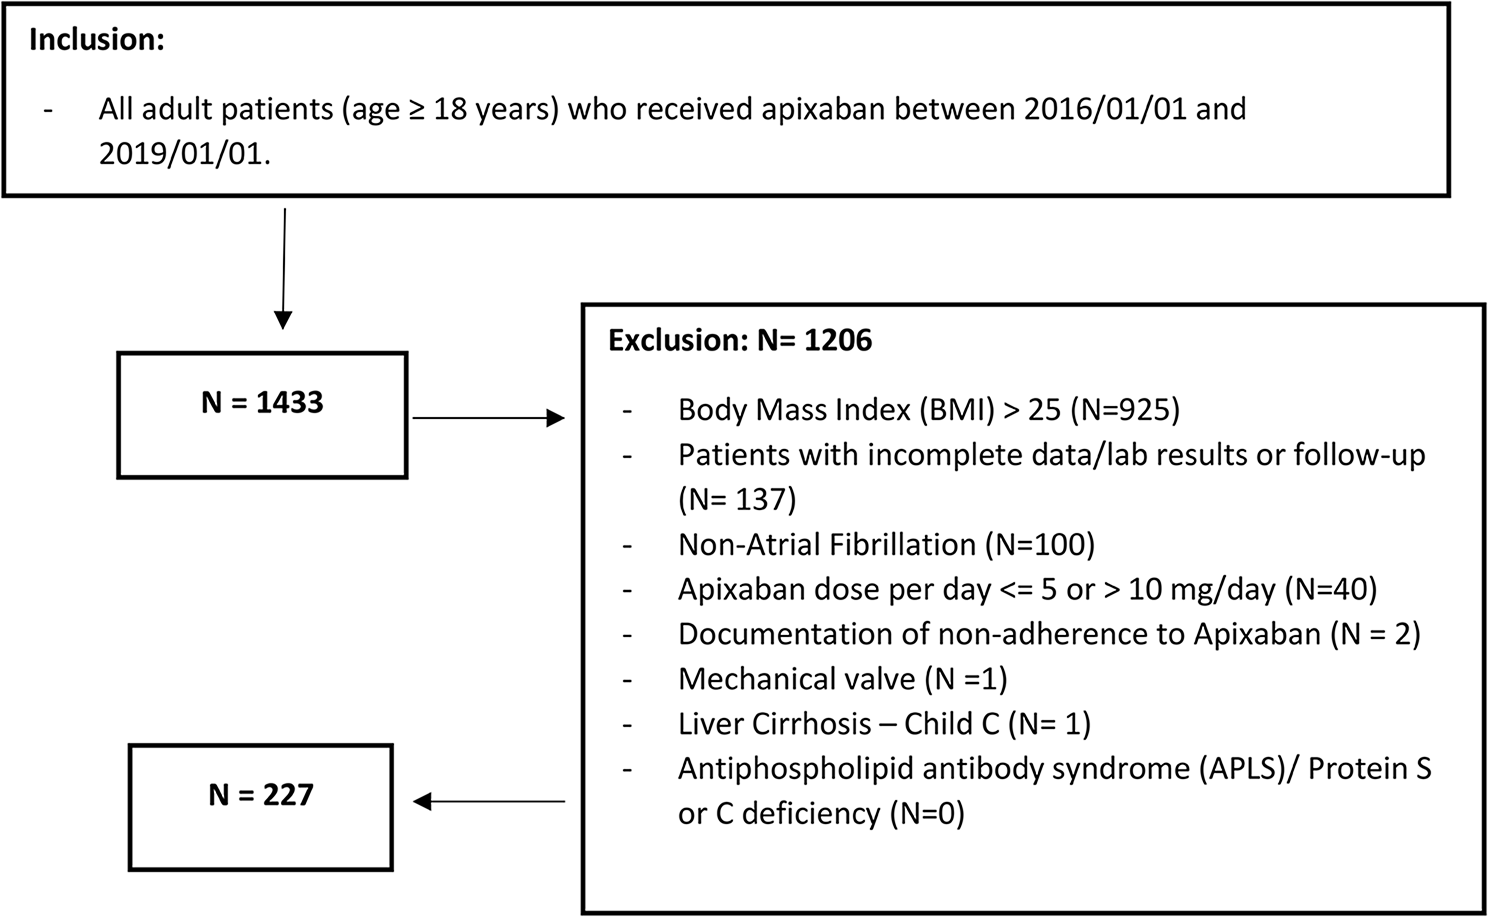 Evaluation of Apixaban standard dosing in underweight patients with non-valvular atrial fibrillation: a retrospective cohort study